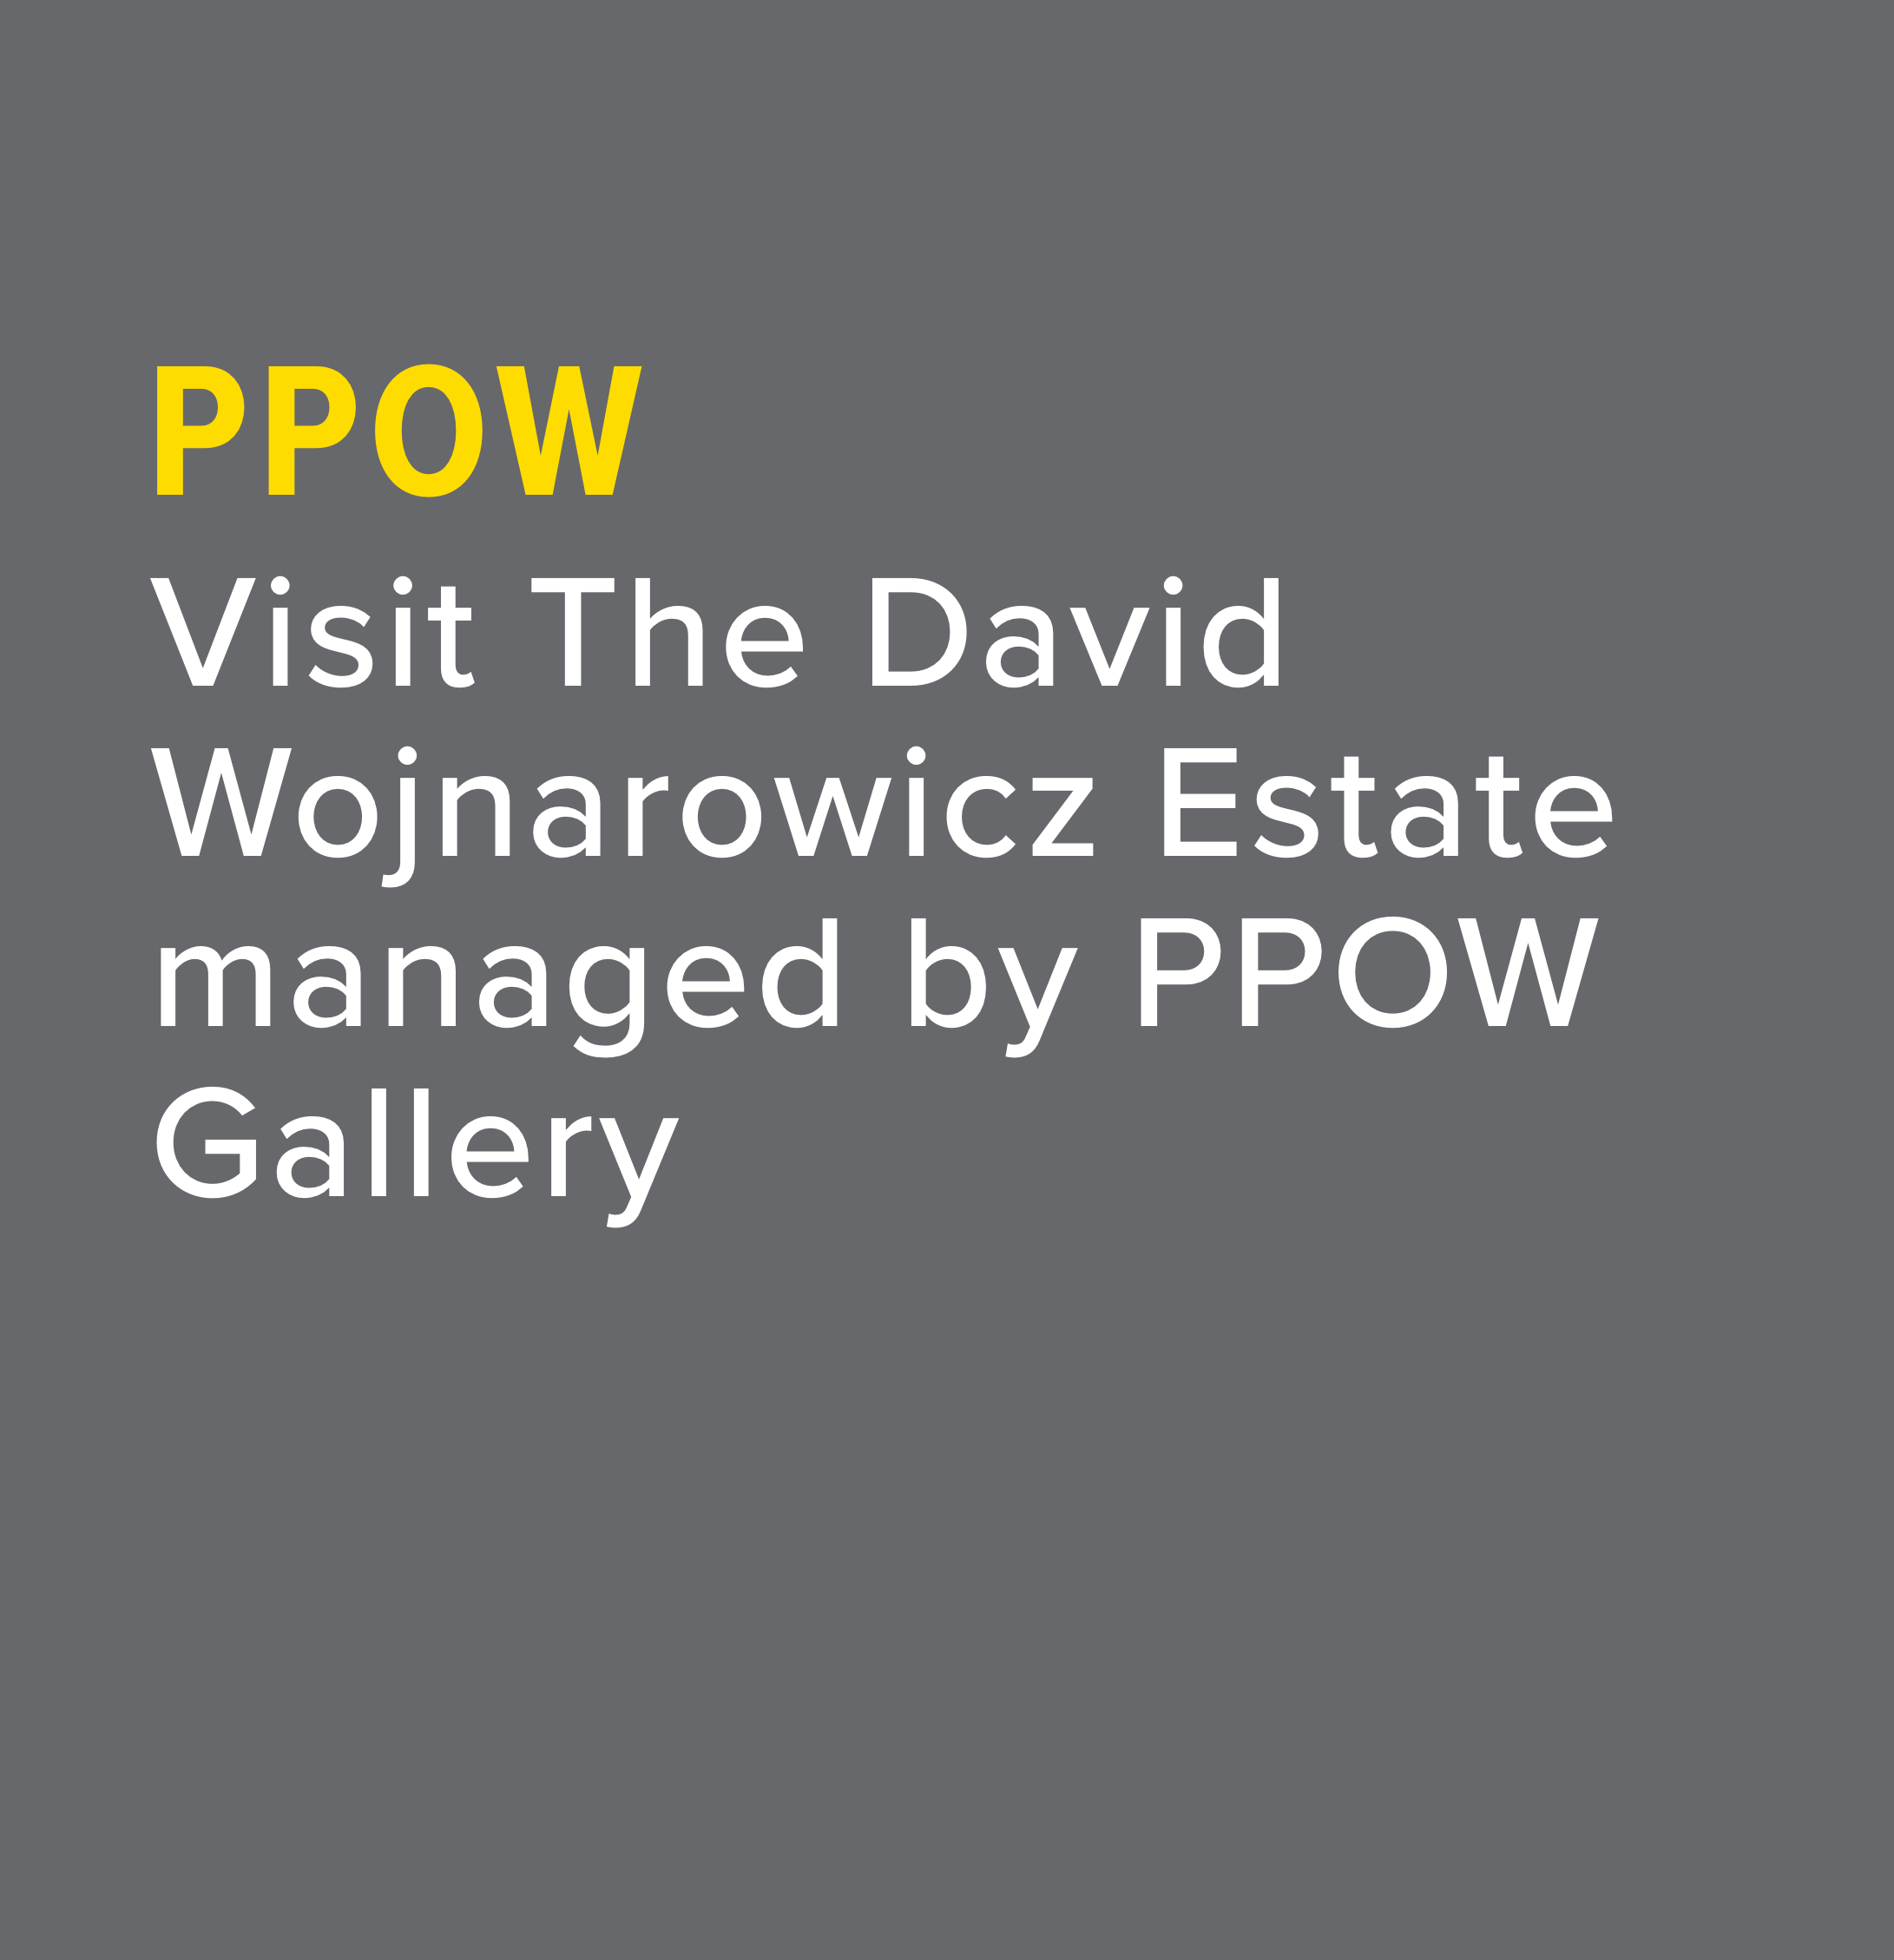 Visit The David Wojnarowicz Estate managed by PPOW Gallery